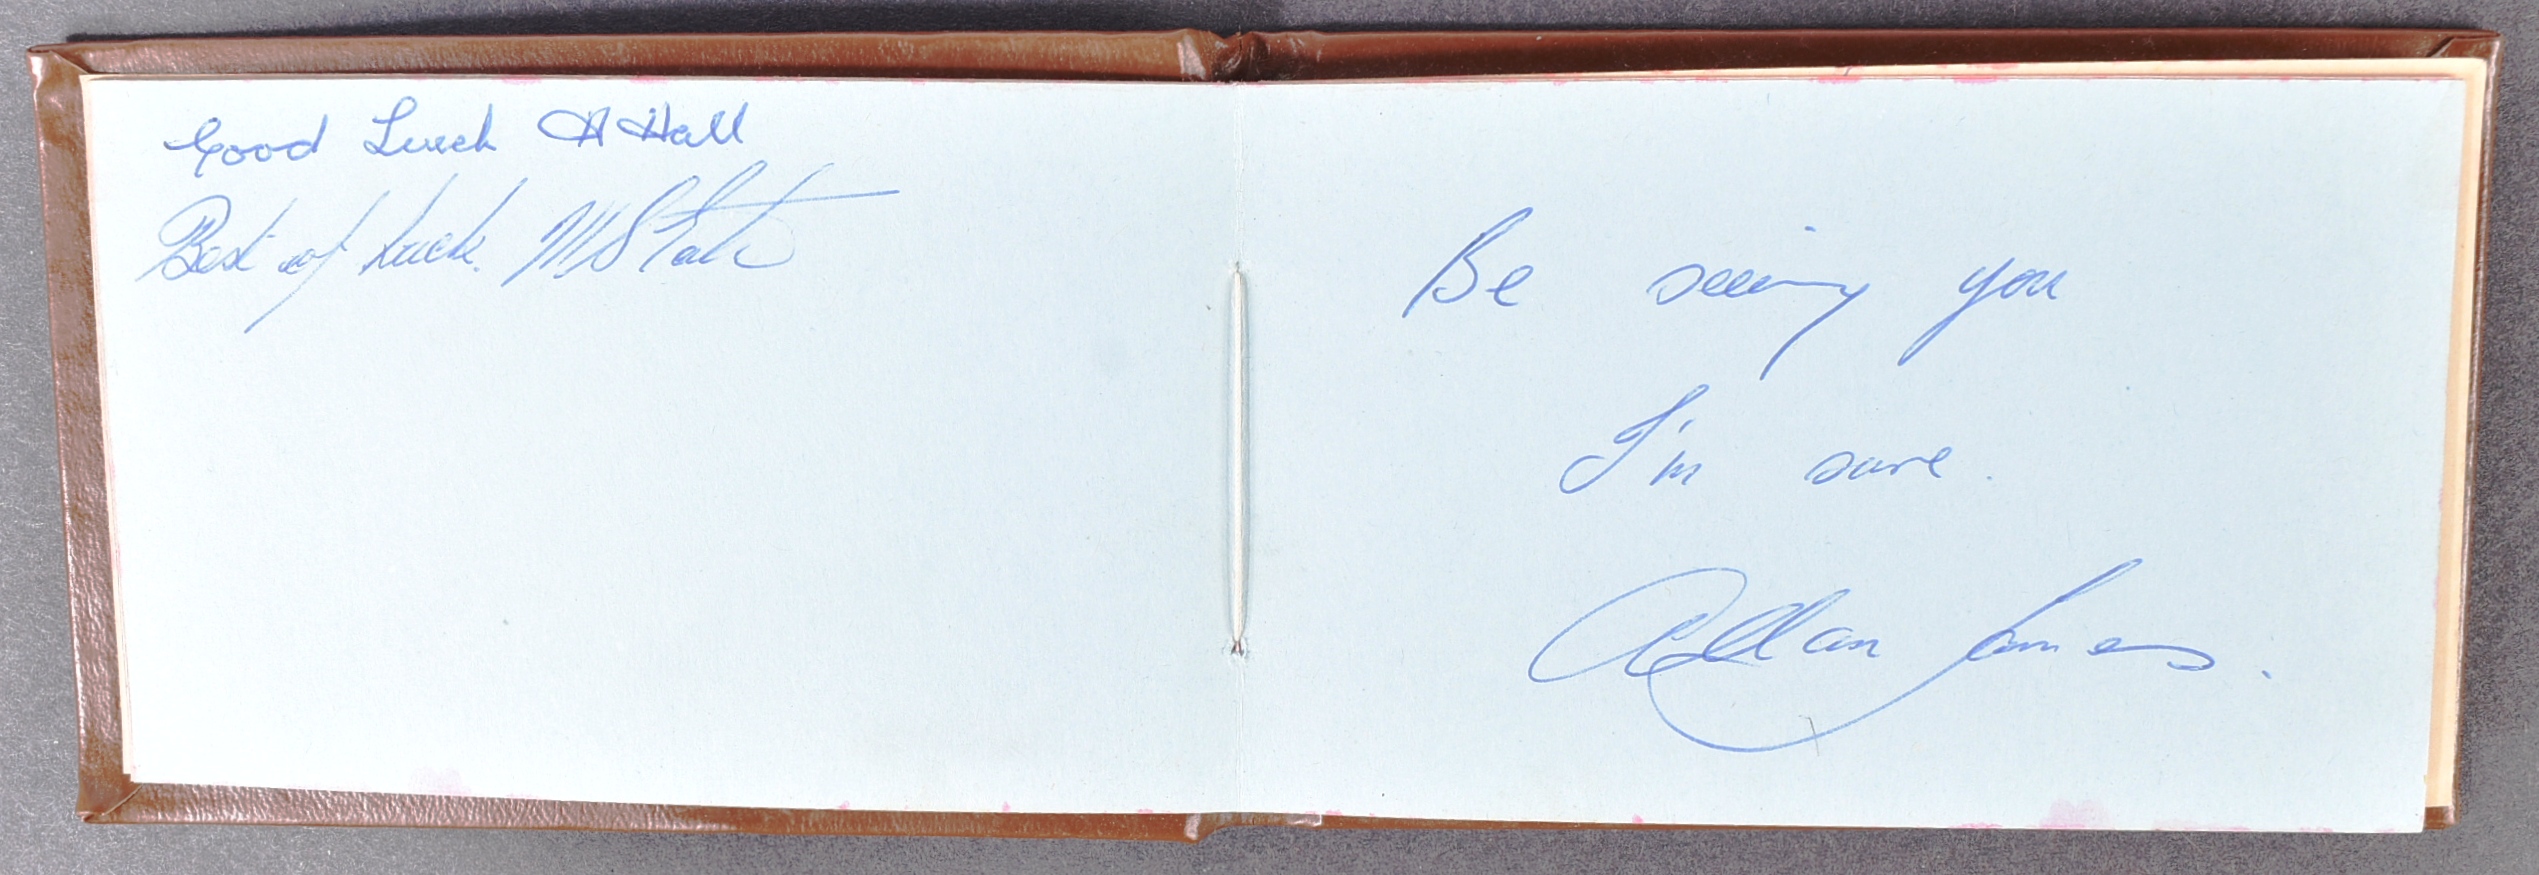 GERALD WHITNEY COLLECTION (CAMERA MAN) - AUTOGRAPH BOOK - Image 4 of 8